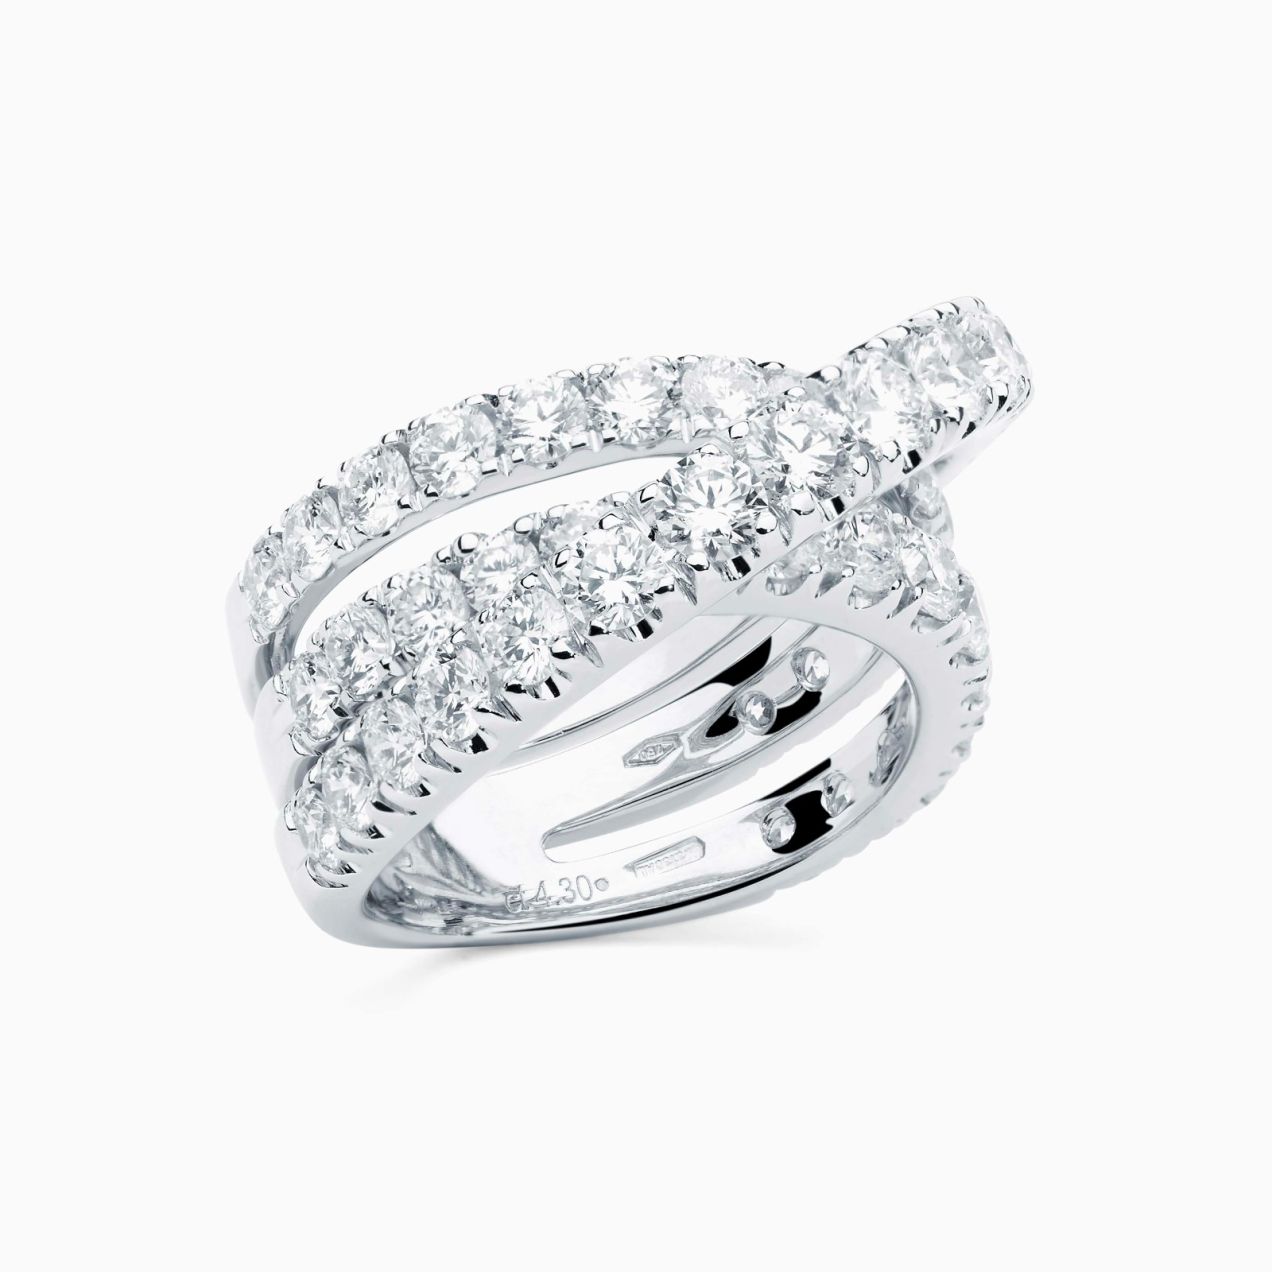 White gold ring with rows of diamonds